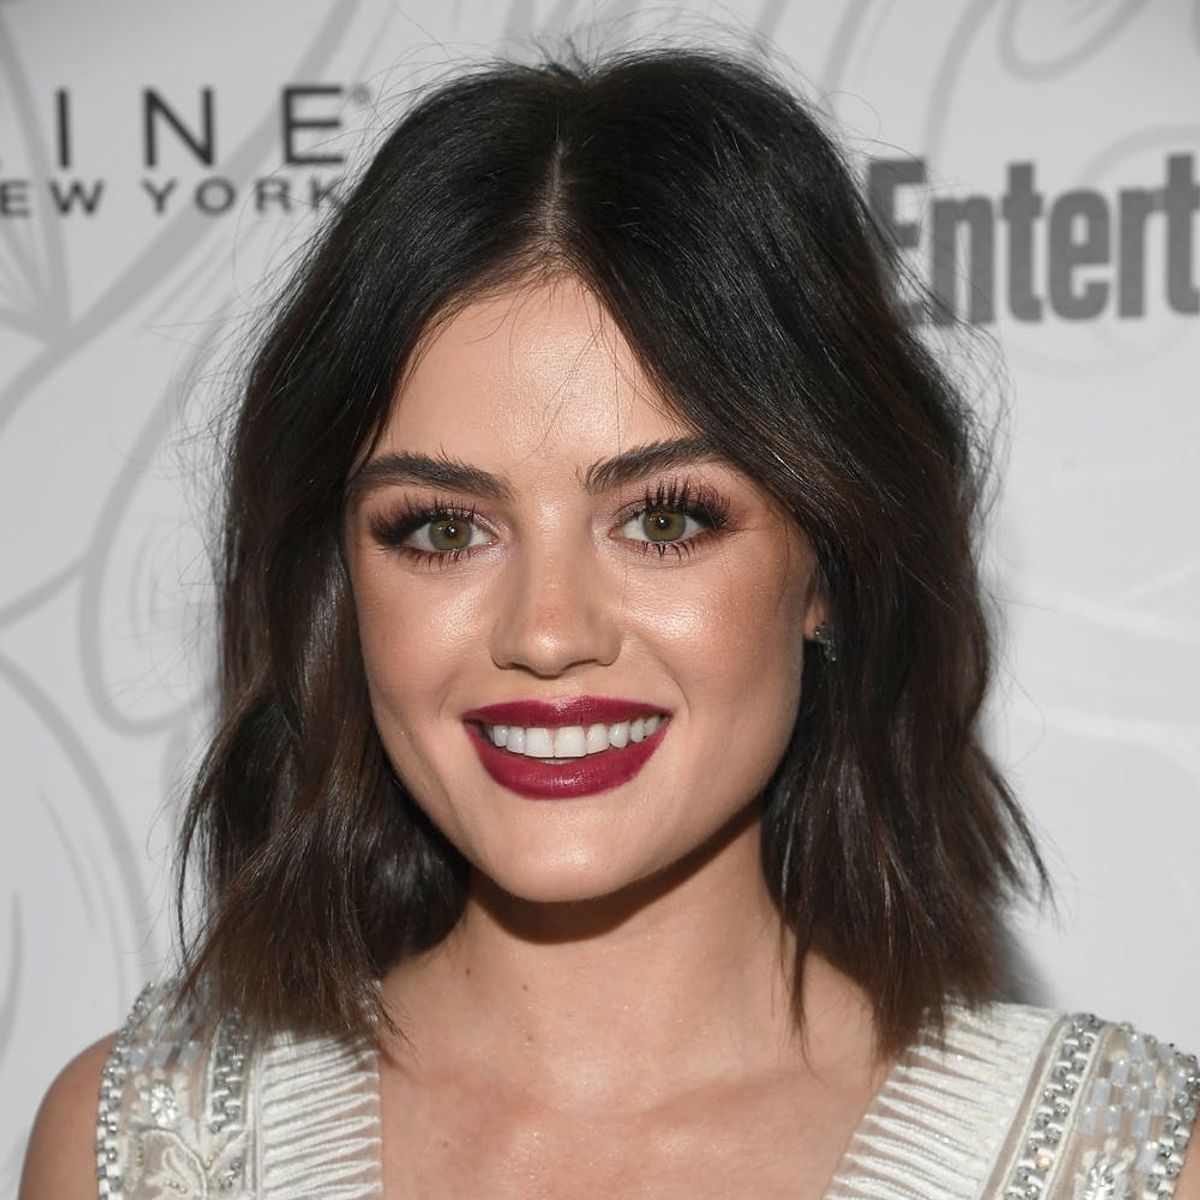 Lucy Hale Is Sporting an Amazing New Tattoo by Dr. Woo